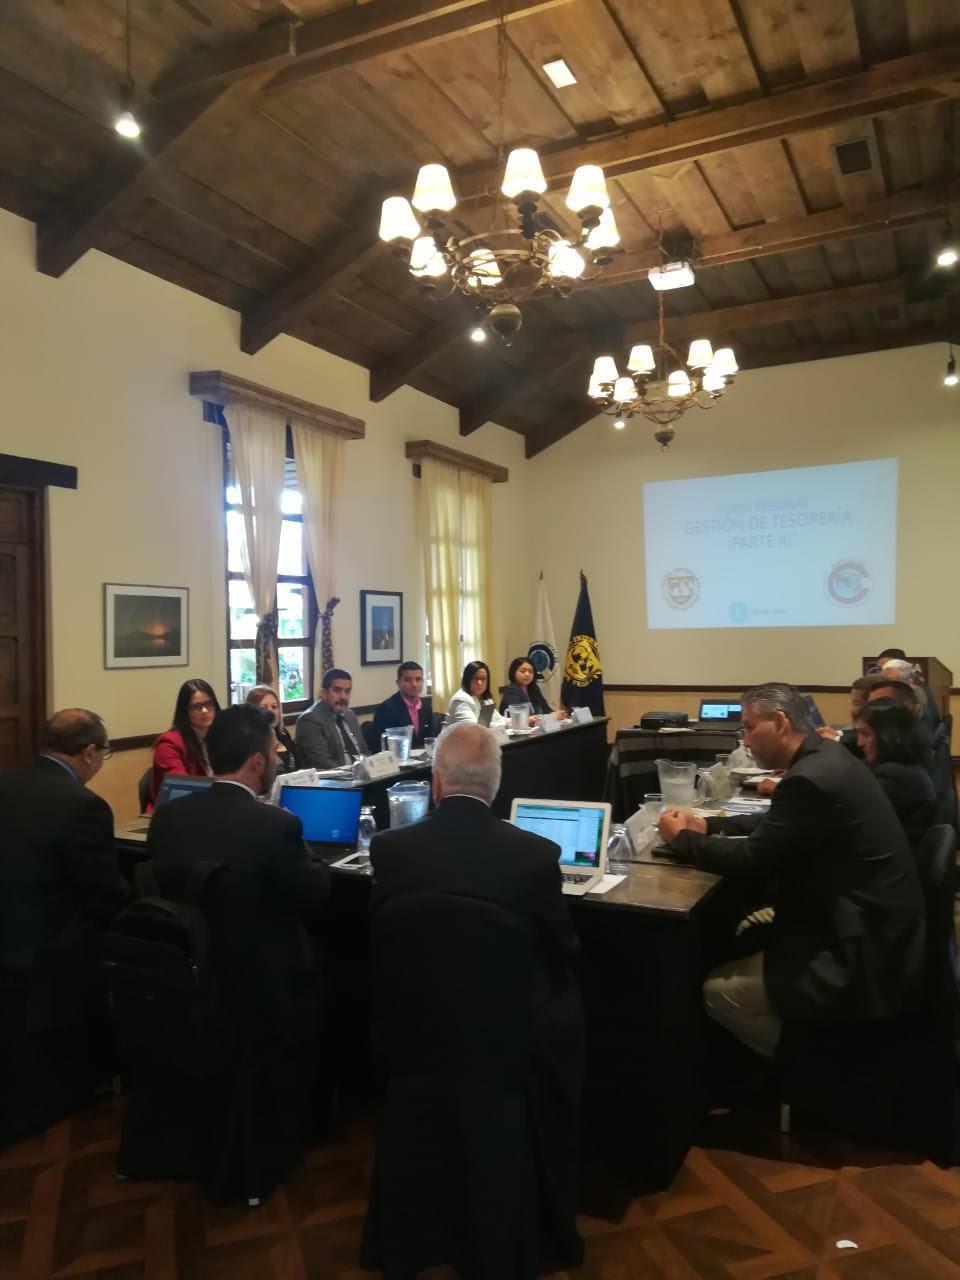 PUBLIC FINANCIAL MANAGEMENT CAPTAC conducted the II Regional Course on Treasury Management in Antigua, Guatemala from August 27 to September 1 of this year, with the